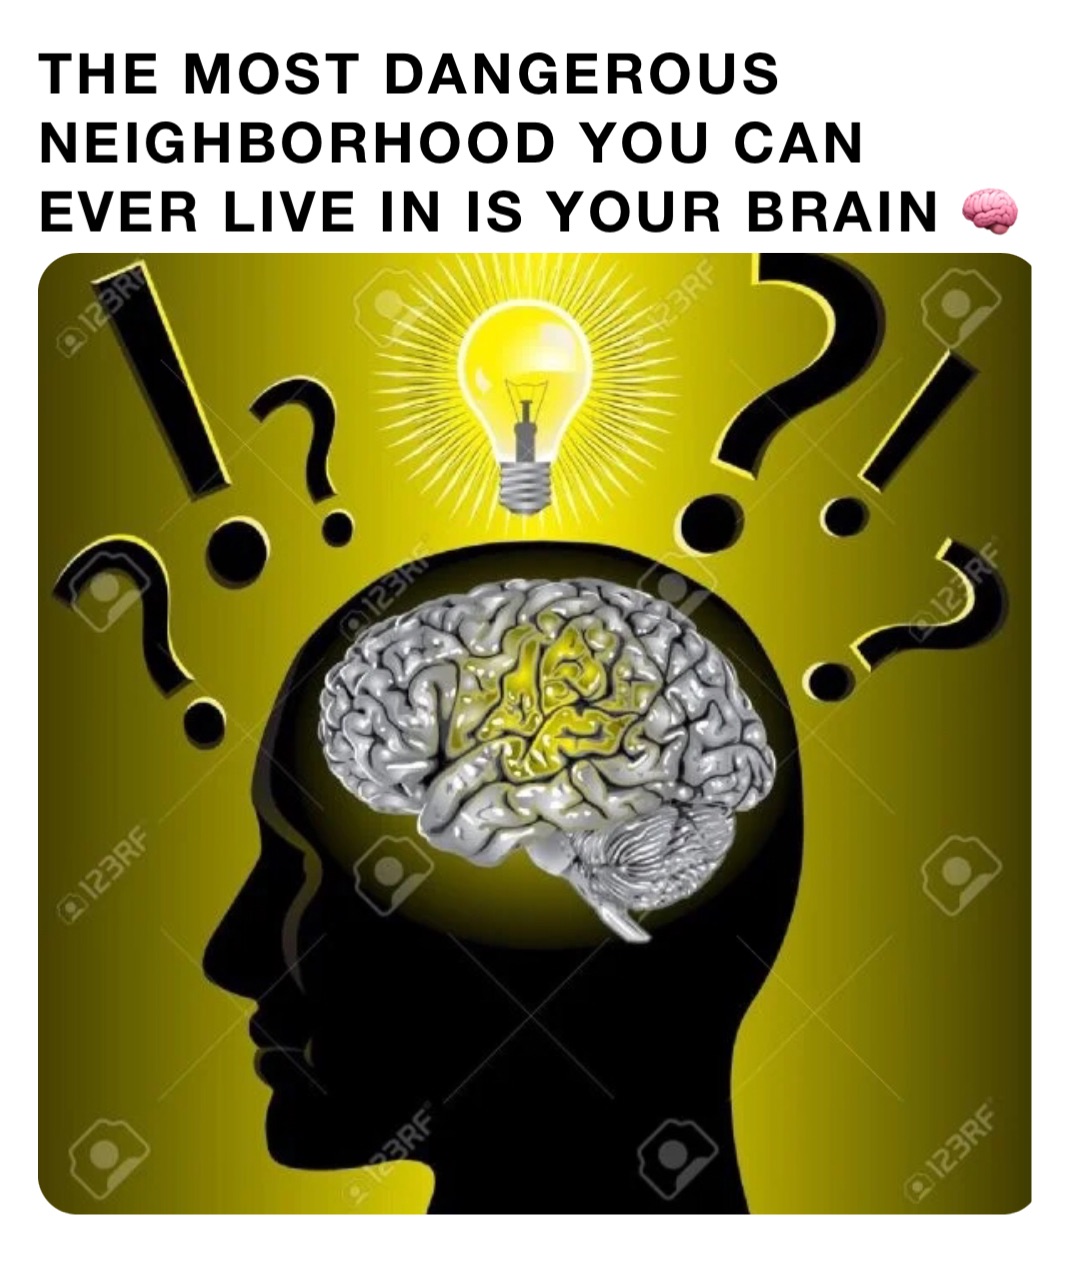 THE MOST DANGEROUS NEIGHBORHOOD YOU CAN EVER LIVE IN IS YOUR BRAIN 🧠